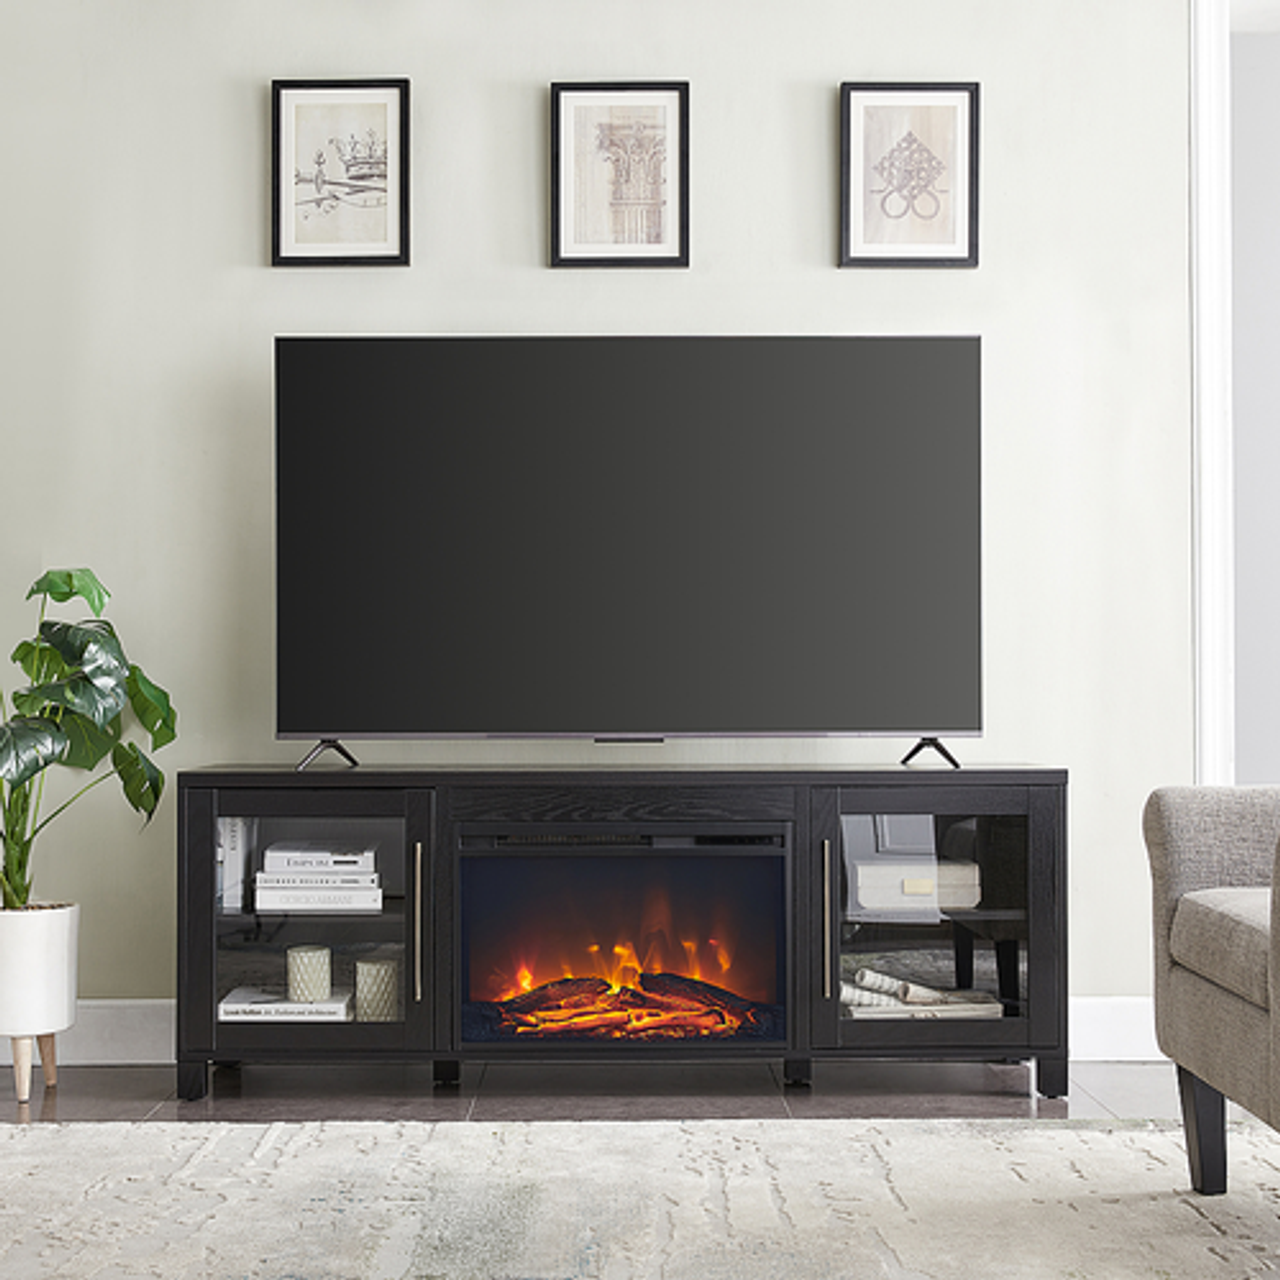 Camden&Wells - Quincy Log Fireplace for Most TVs up to 80" - Black Grain